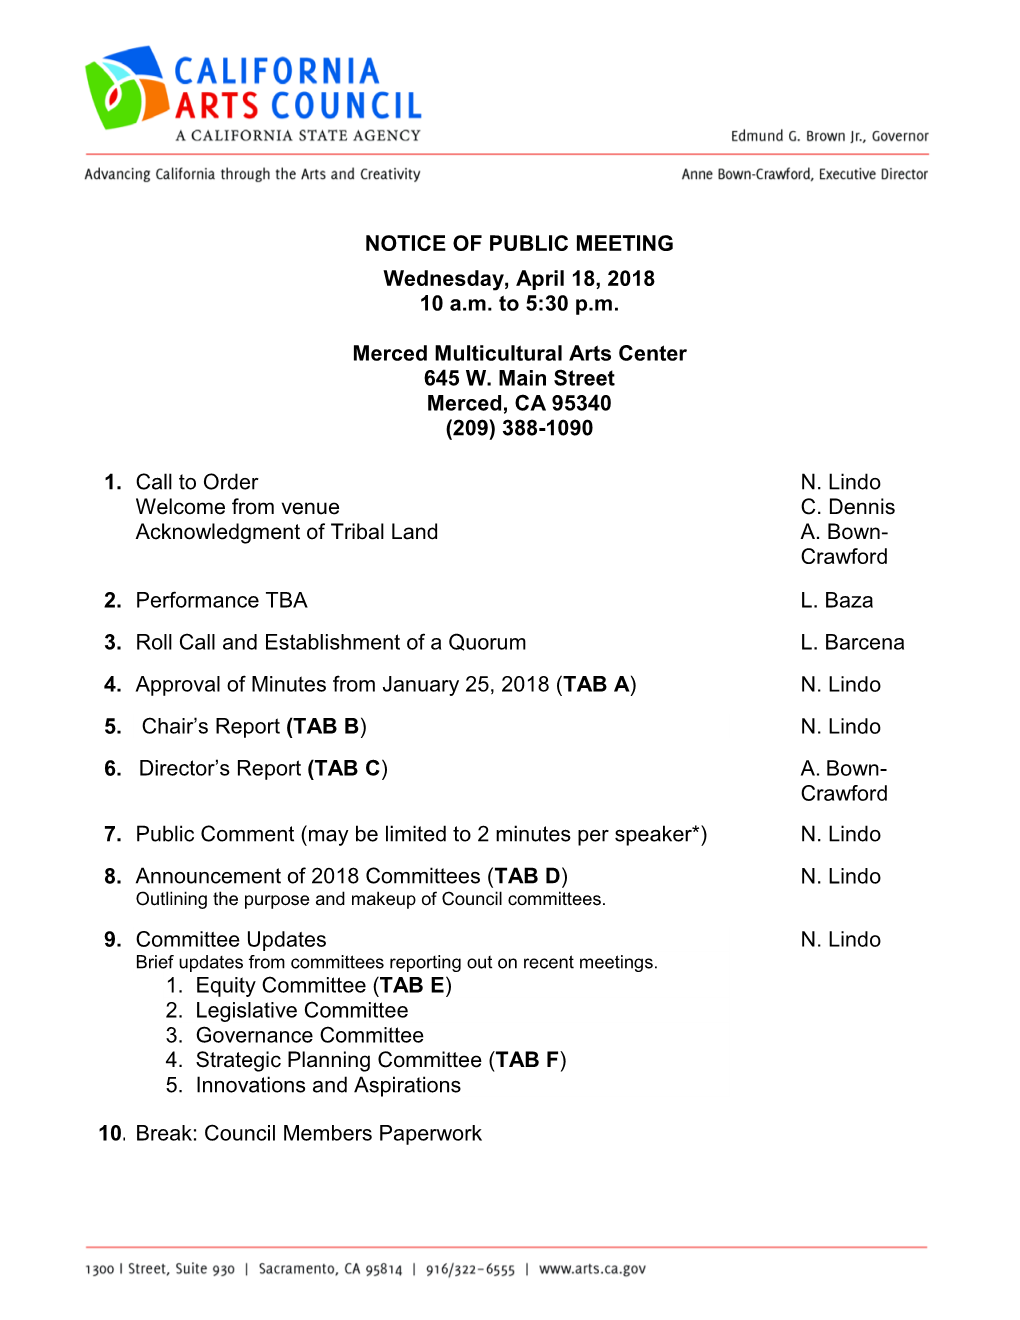 NOTICE of PUBLIC MEETING Wednesday, April 18, 2018 10 A.M. to 5:30 P.M